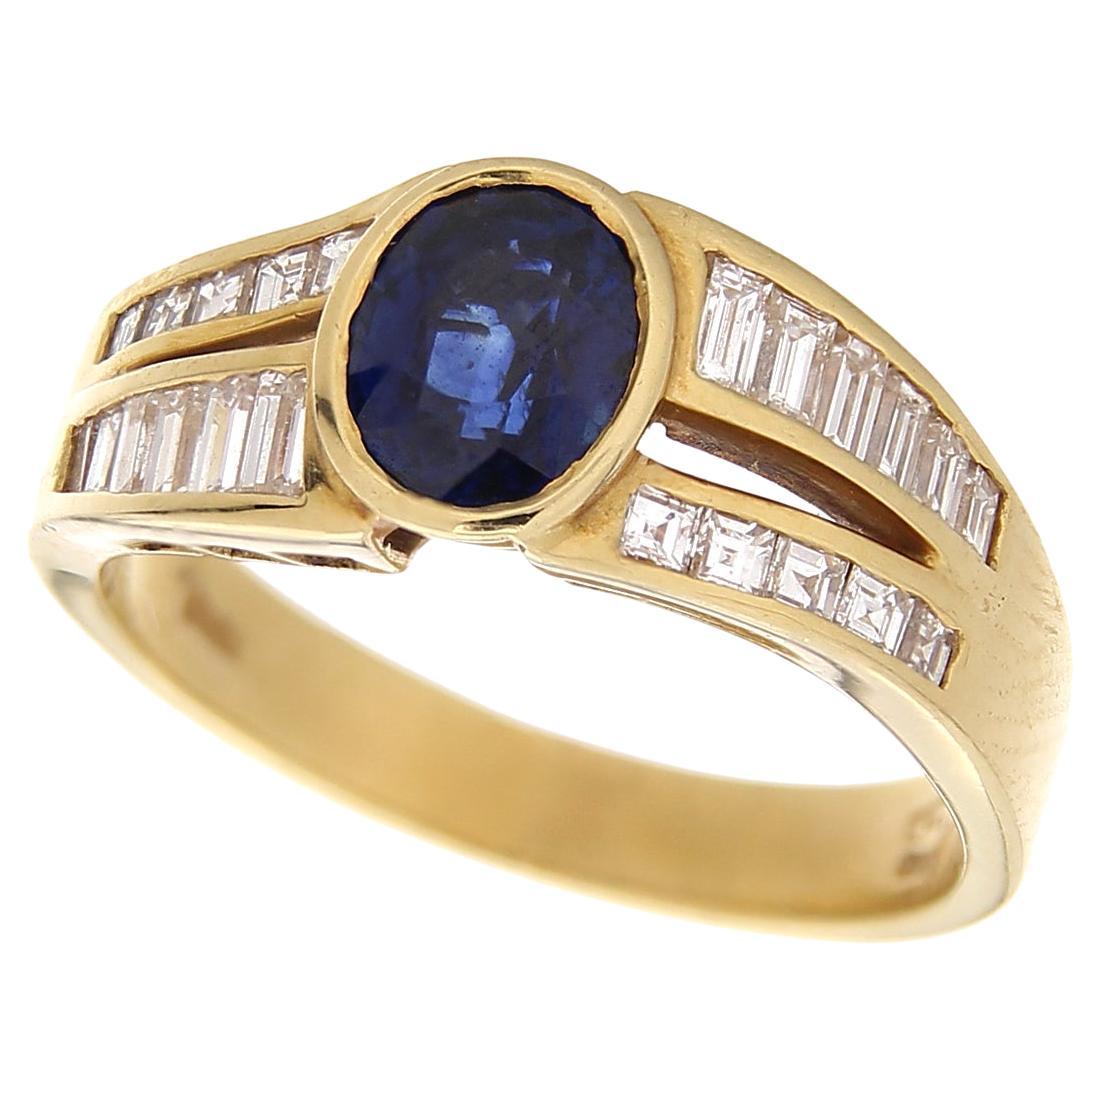 18kt Yellow Gold Vintage Ring 1.51 Ct Blue Sapphire & 0.89 Ct White Diamonds